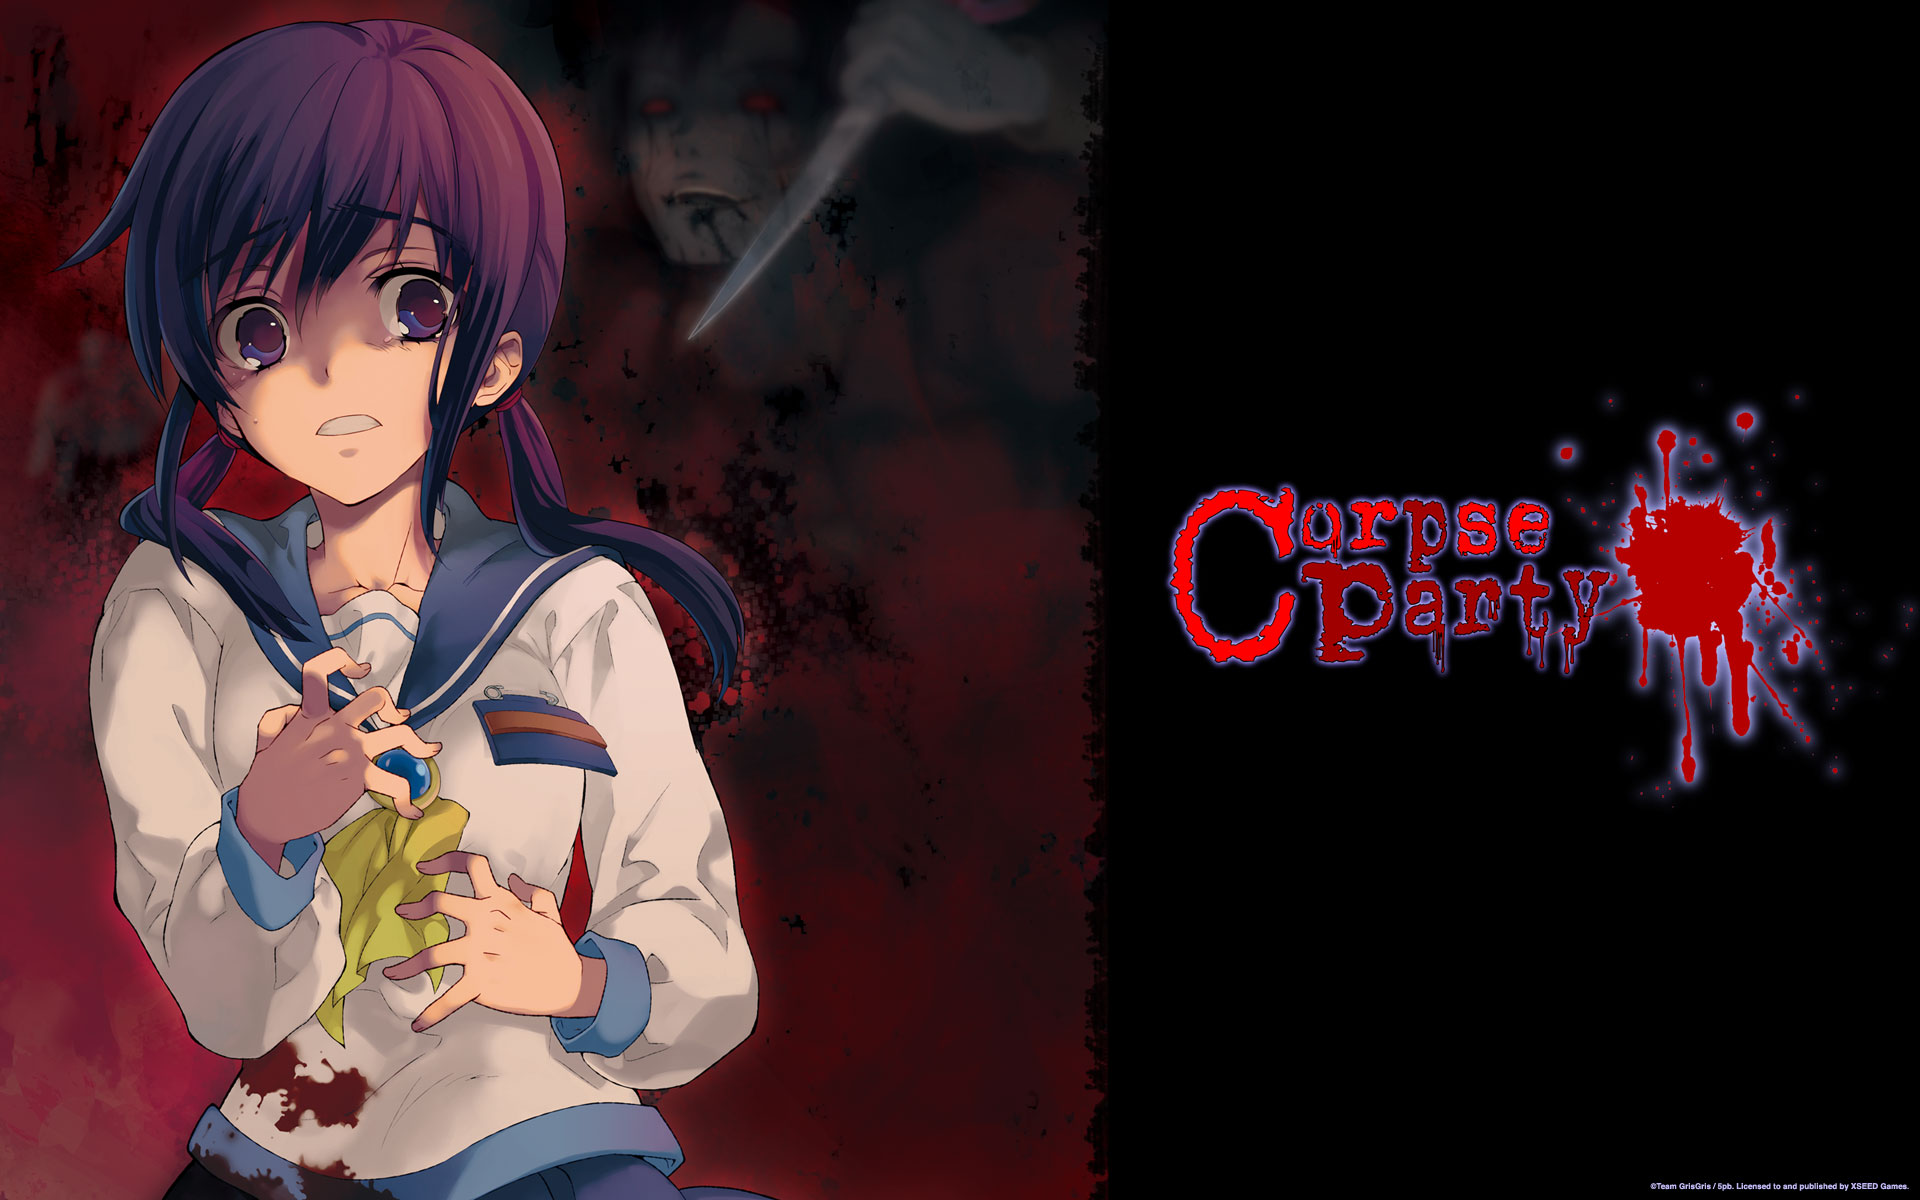 Anime Corpse Party HD Wallpaper | Background Image